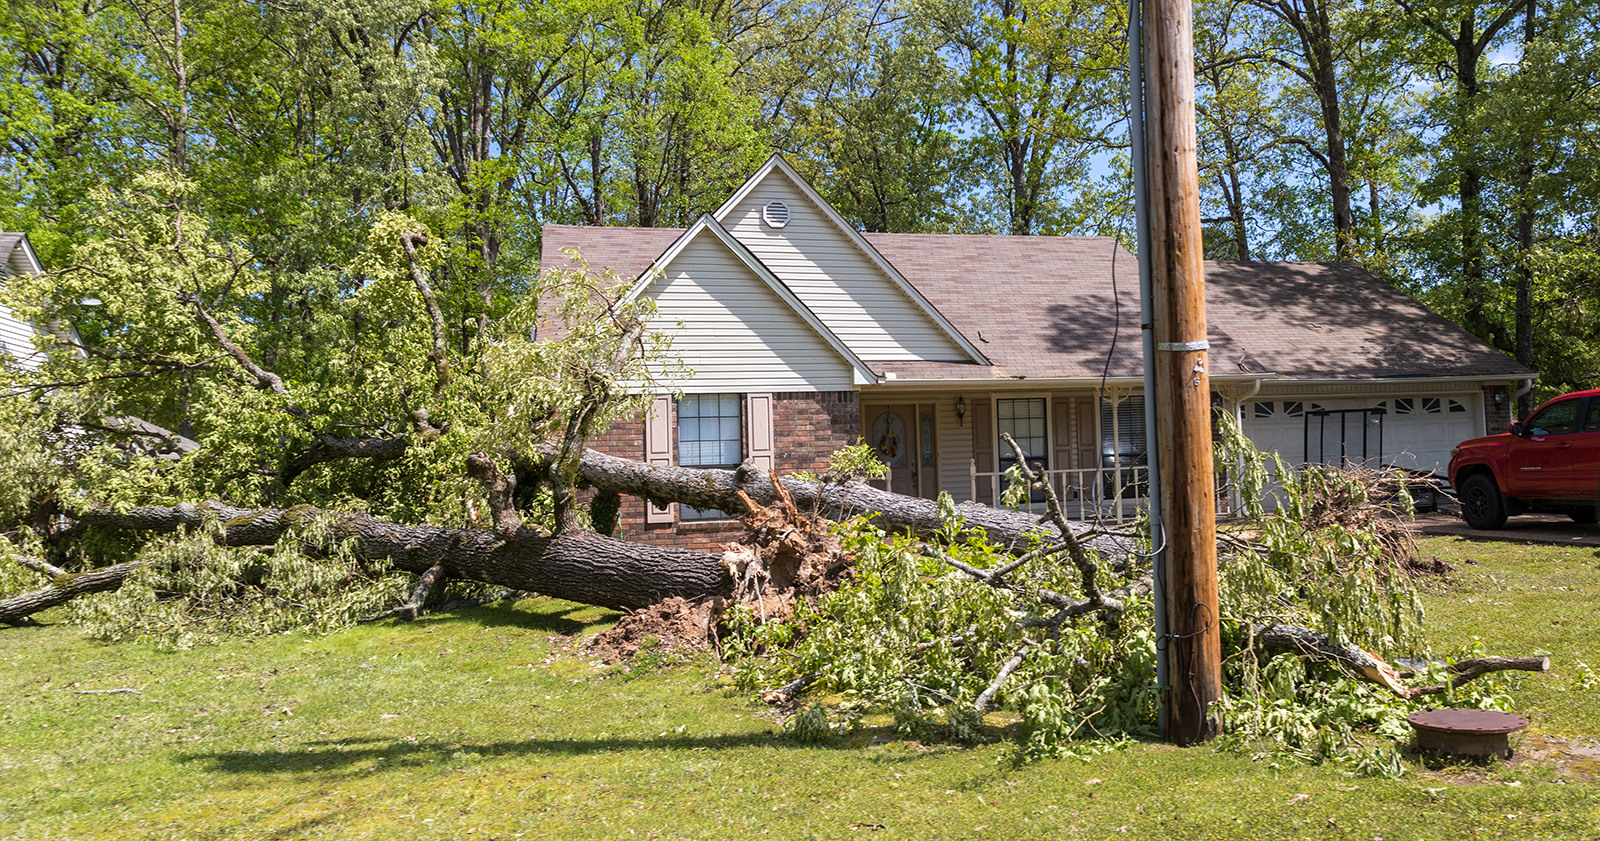 How To Prepare For An Upcoming Storm Or Other Natural Disasters